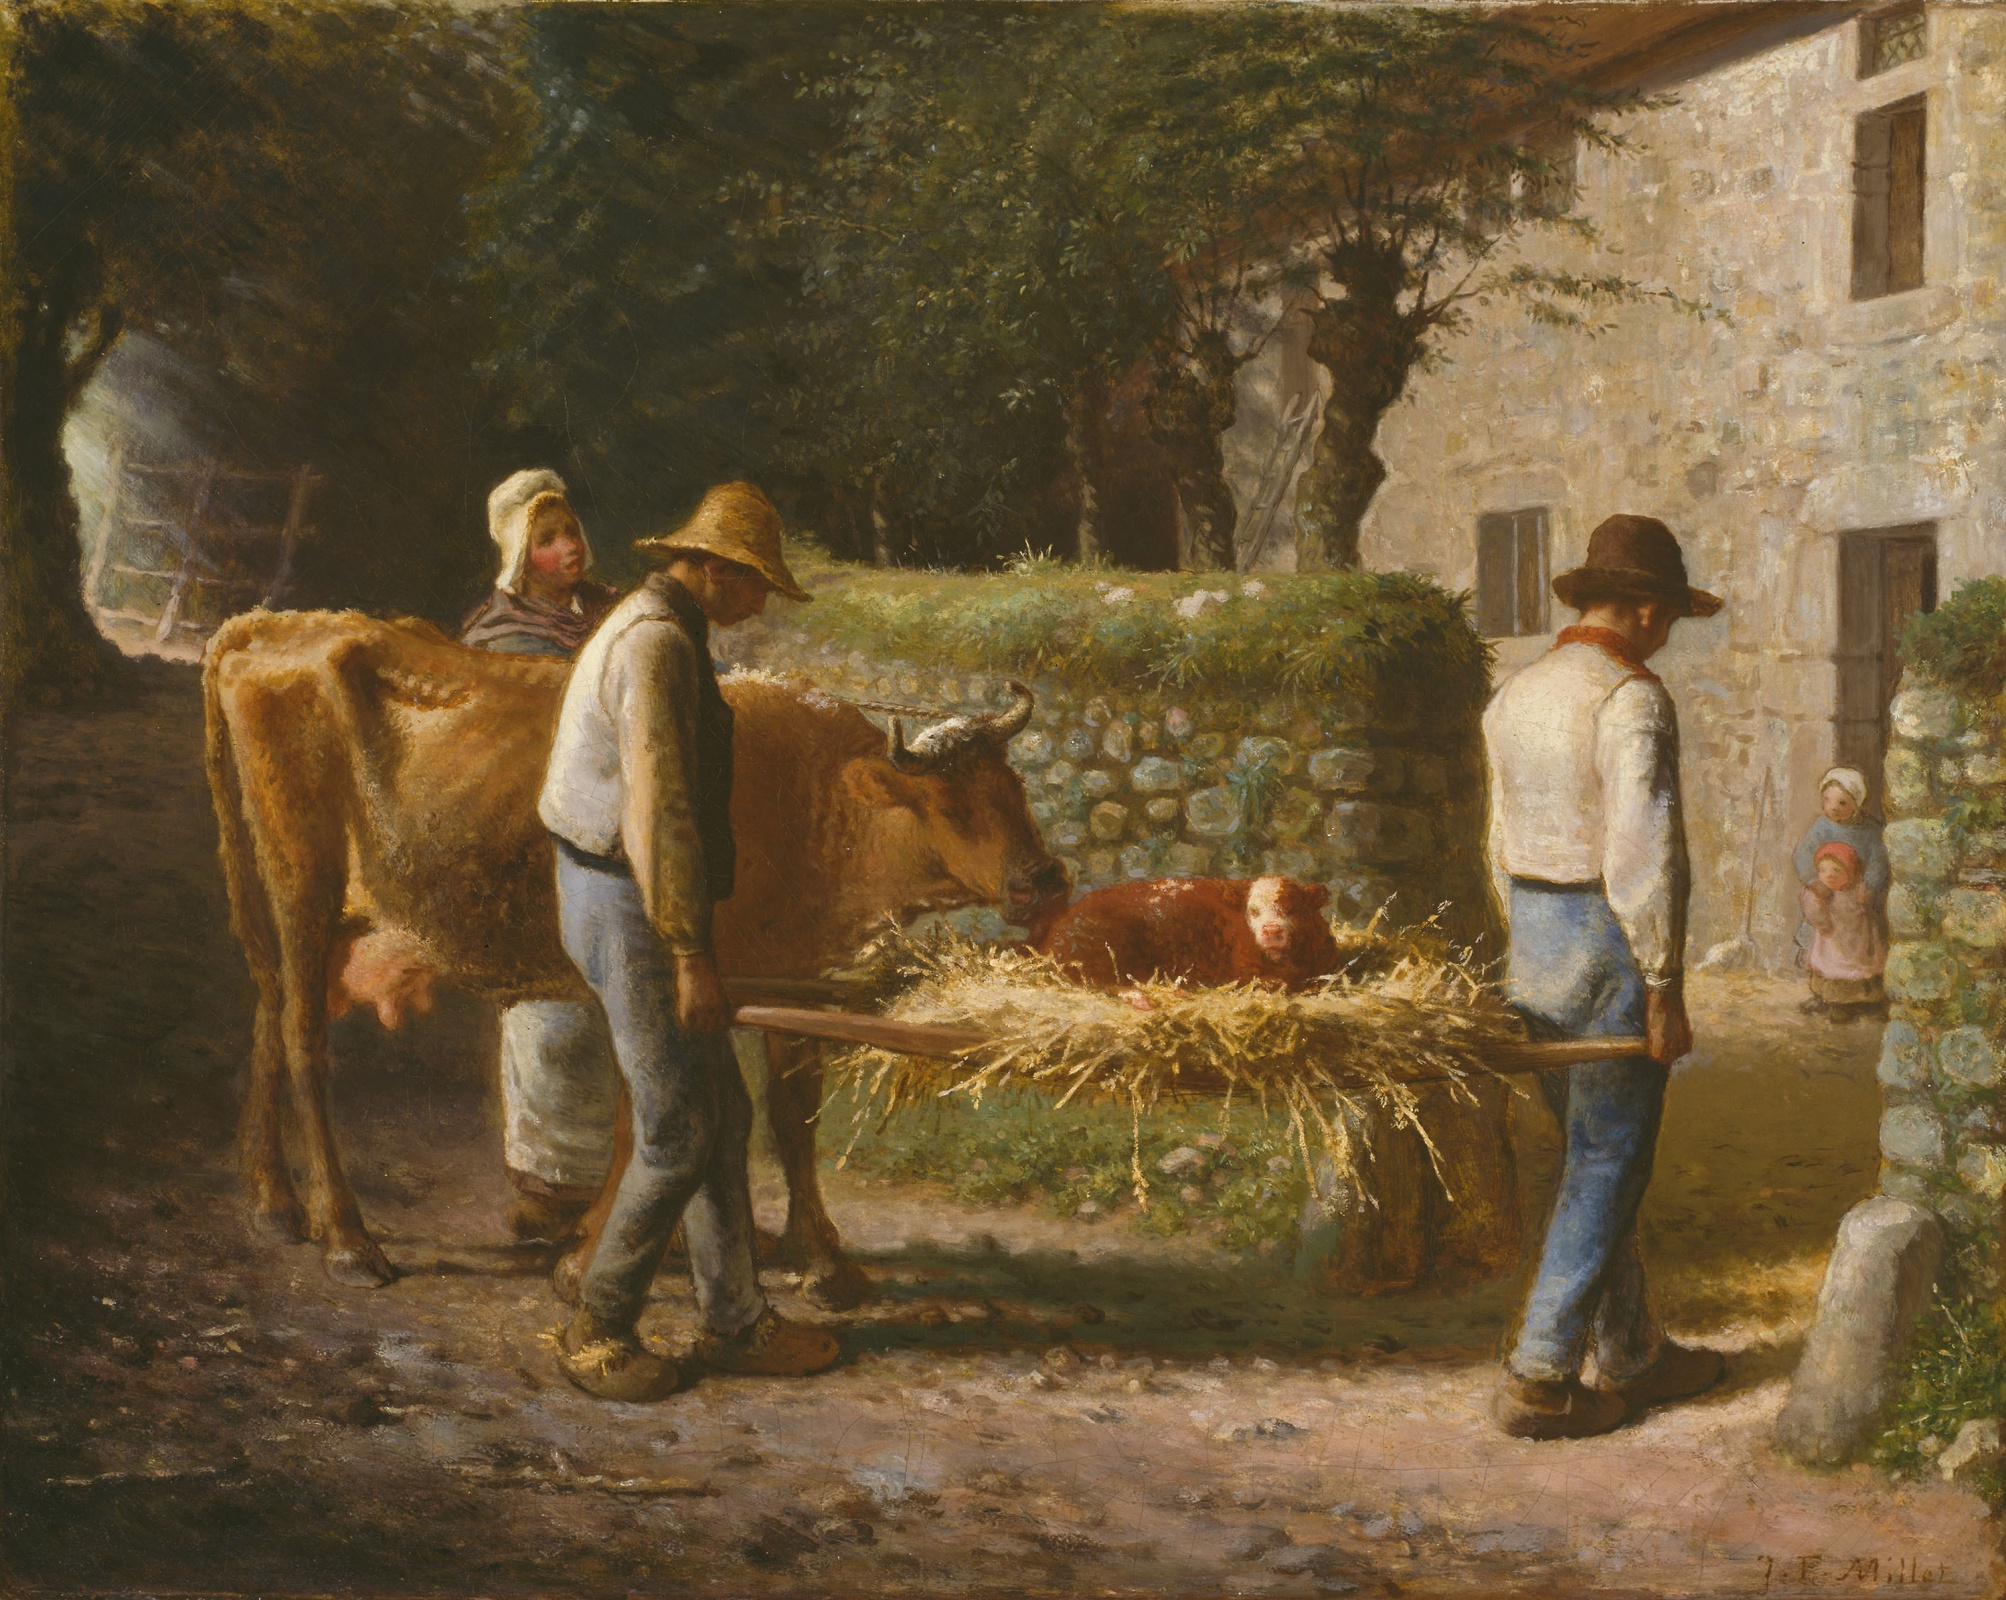 peasants working in the field